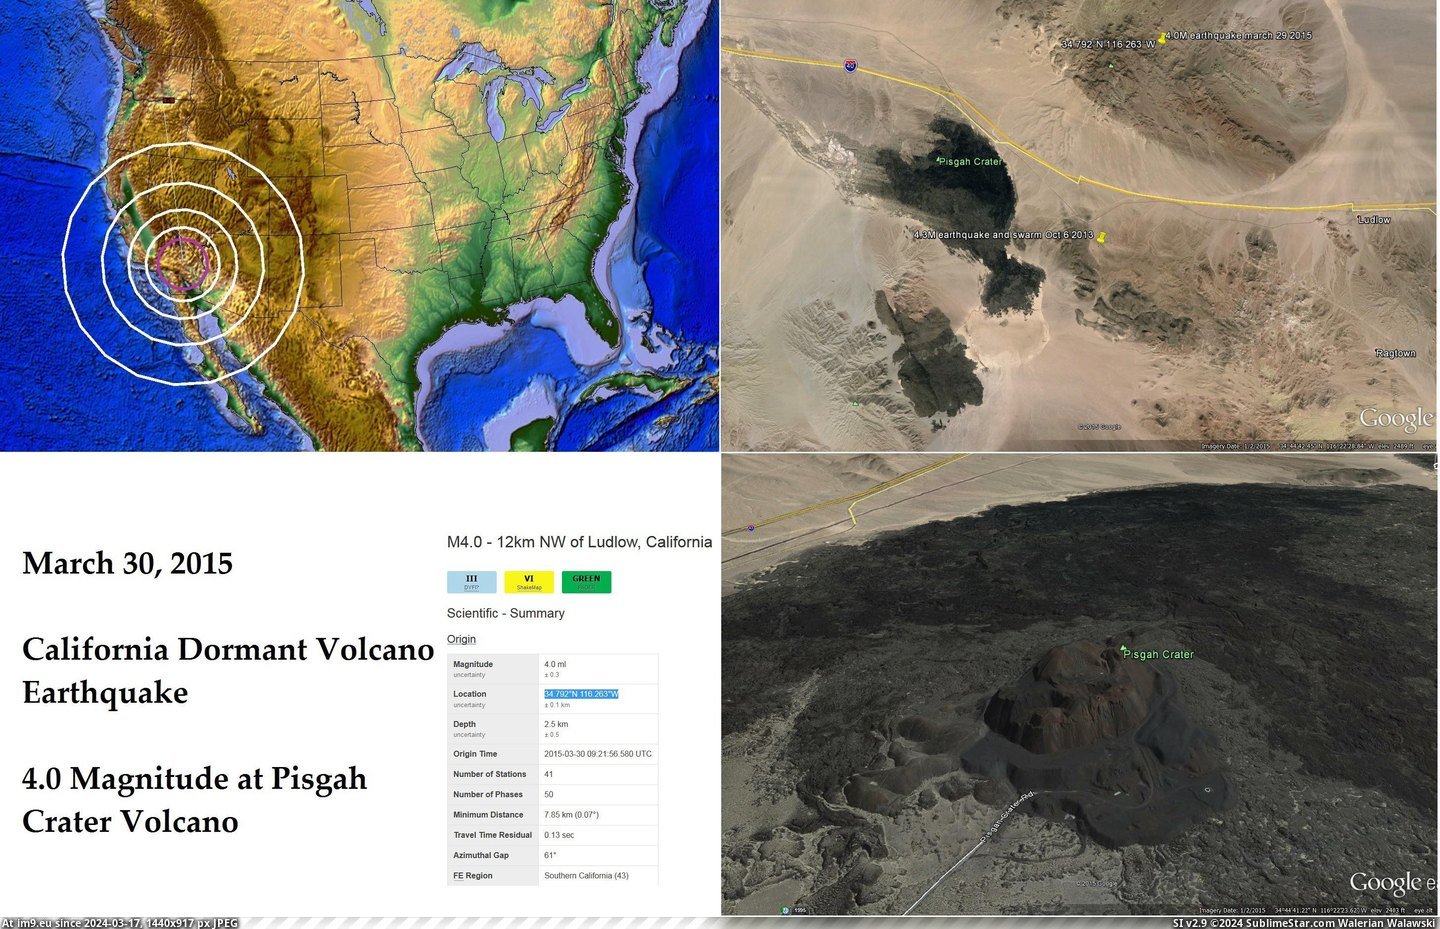 #Crater #Earthquake #March 4.0m-earthquake-pisgah-crater-march-30-2015 Pic. (Изображение из альбом Alternative-News.tk))